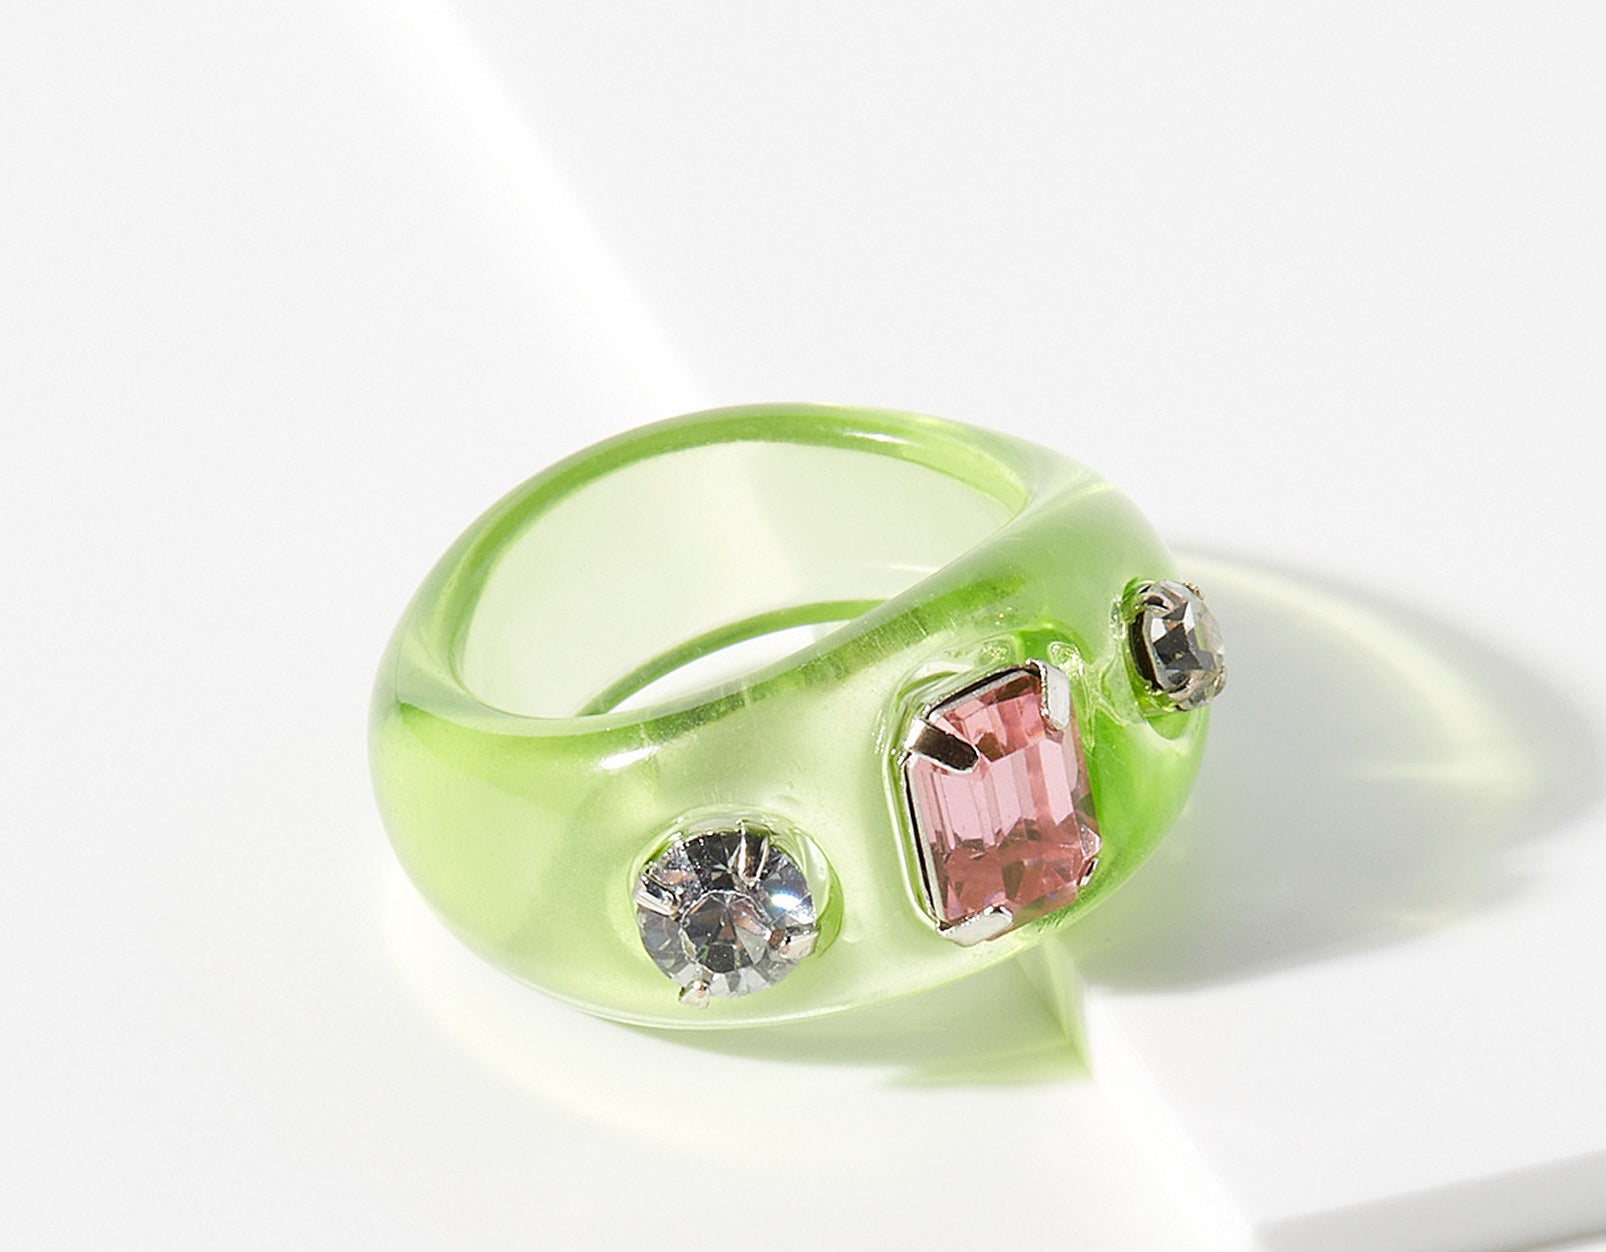 A chunky ring with fake jewels on the top